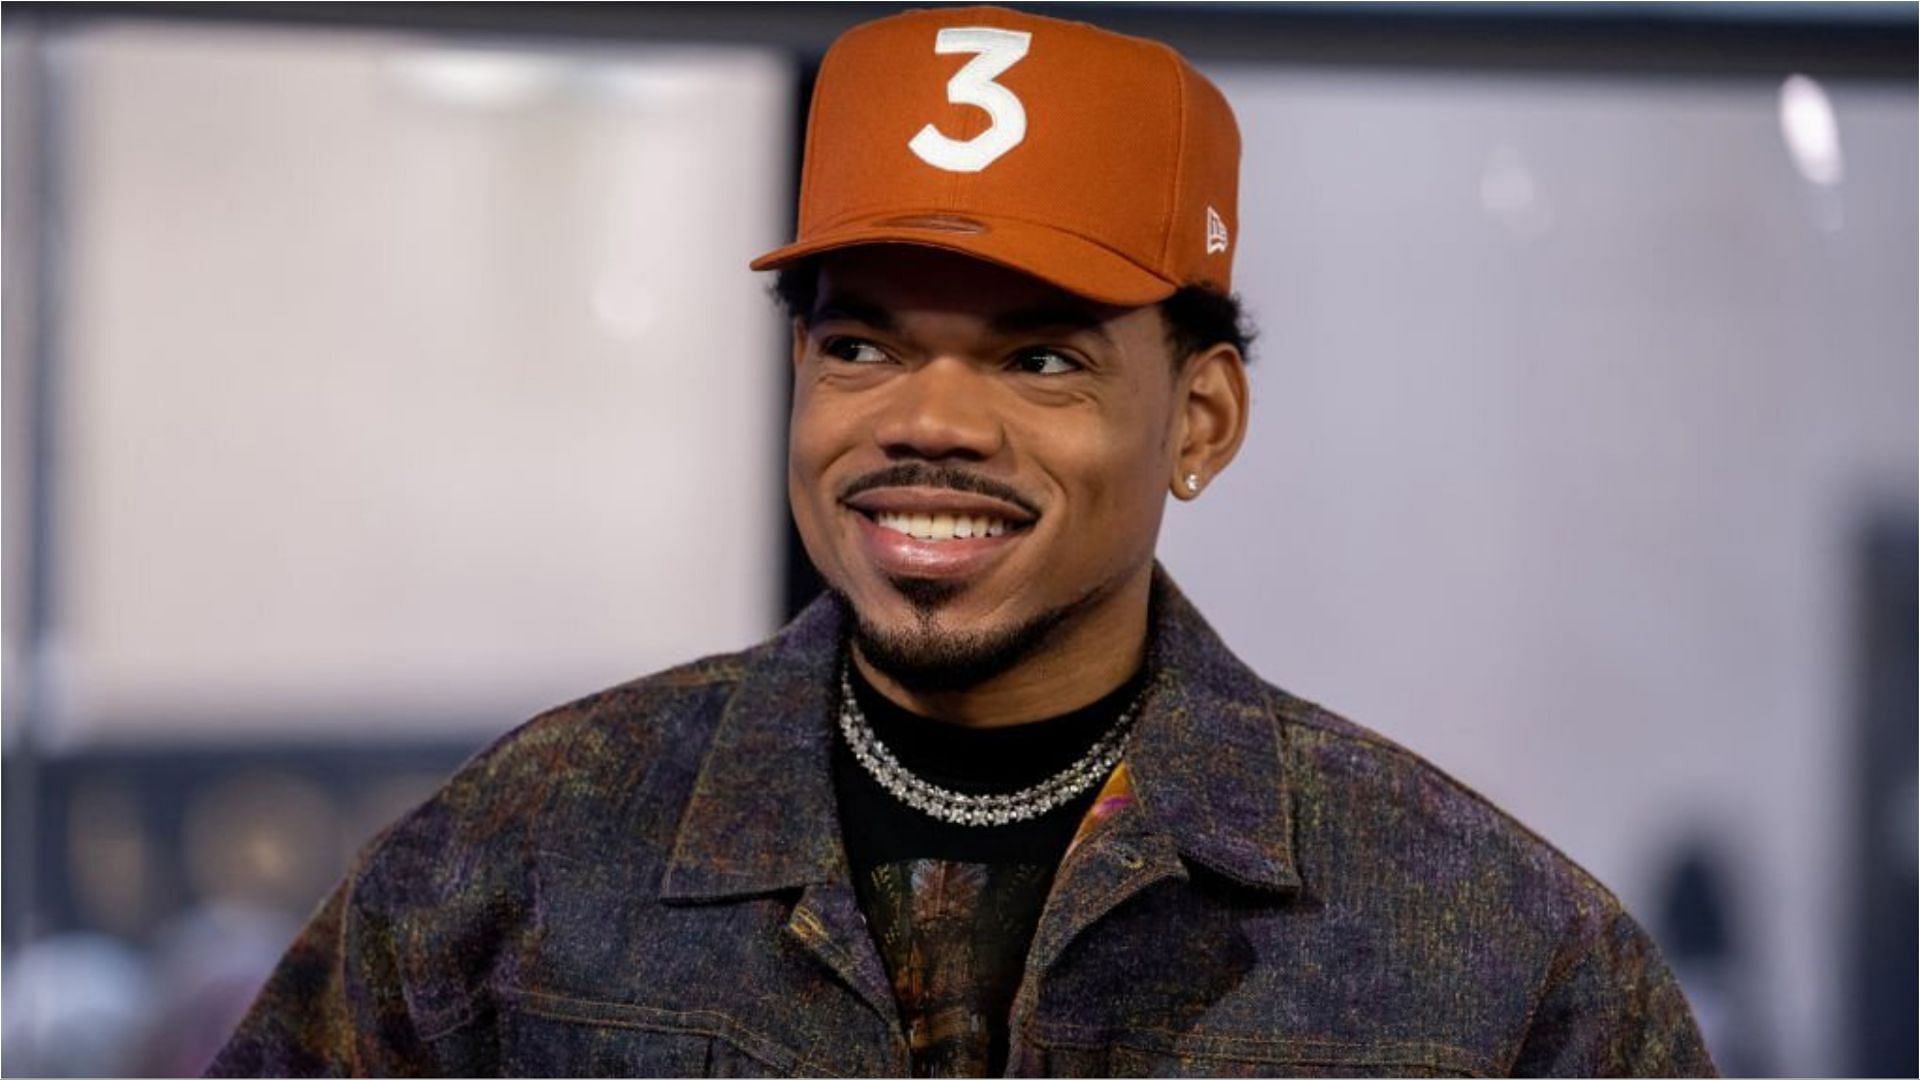 Chance the Rapper has been always spotted wearing a hat with the number 3 (Image via Nathan Congleton/Getty Images)